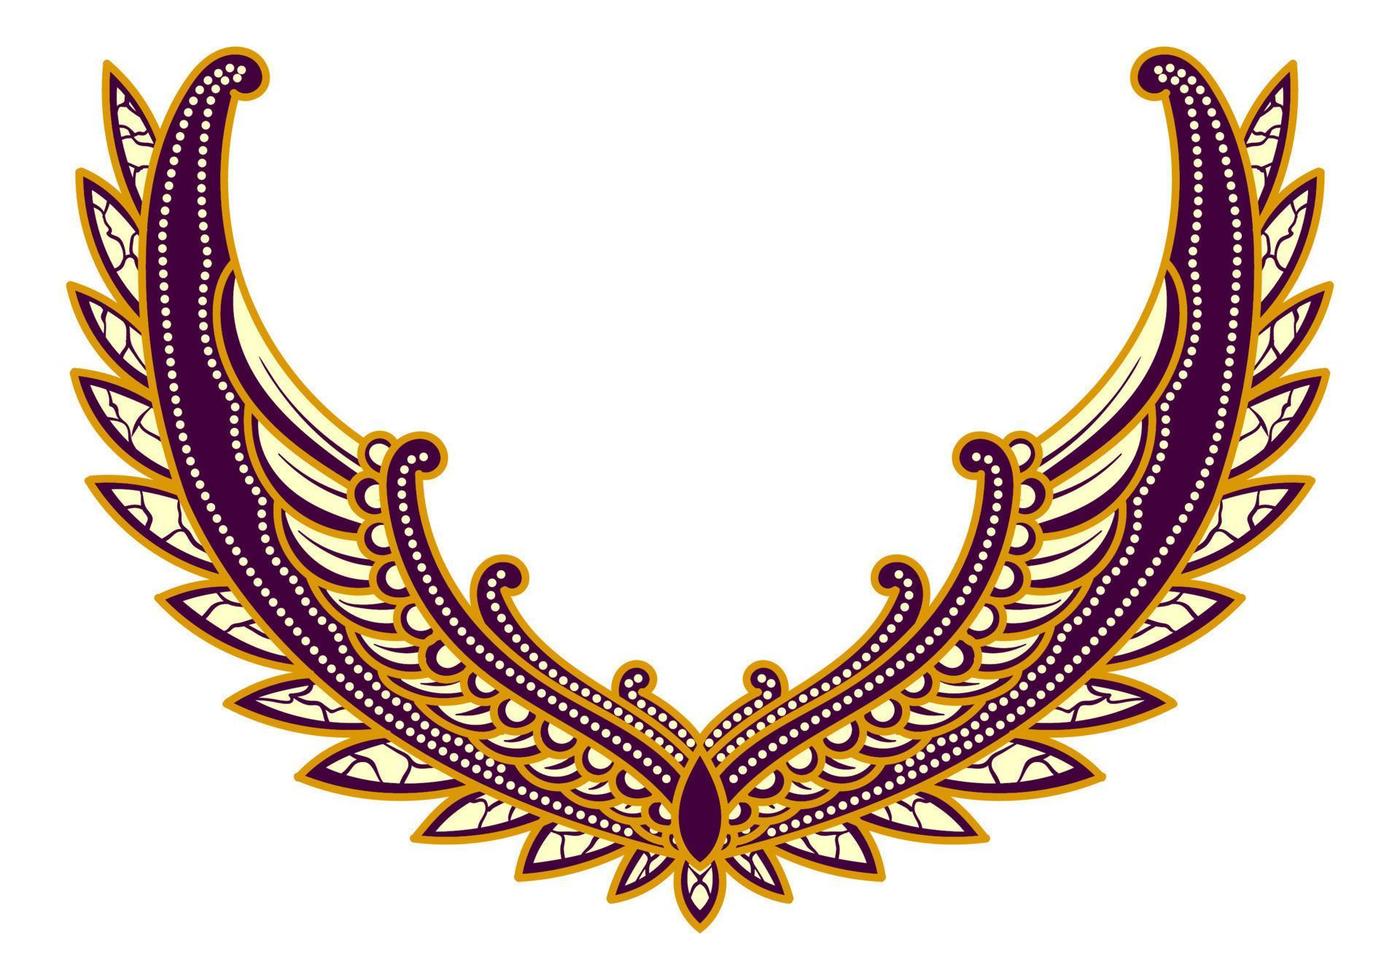 Javanese culture of floral ornament illustration. Wings shape. Chocolate, purple and cream harmony color. Isolated on white background. Vector eps 10